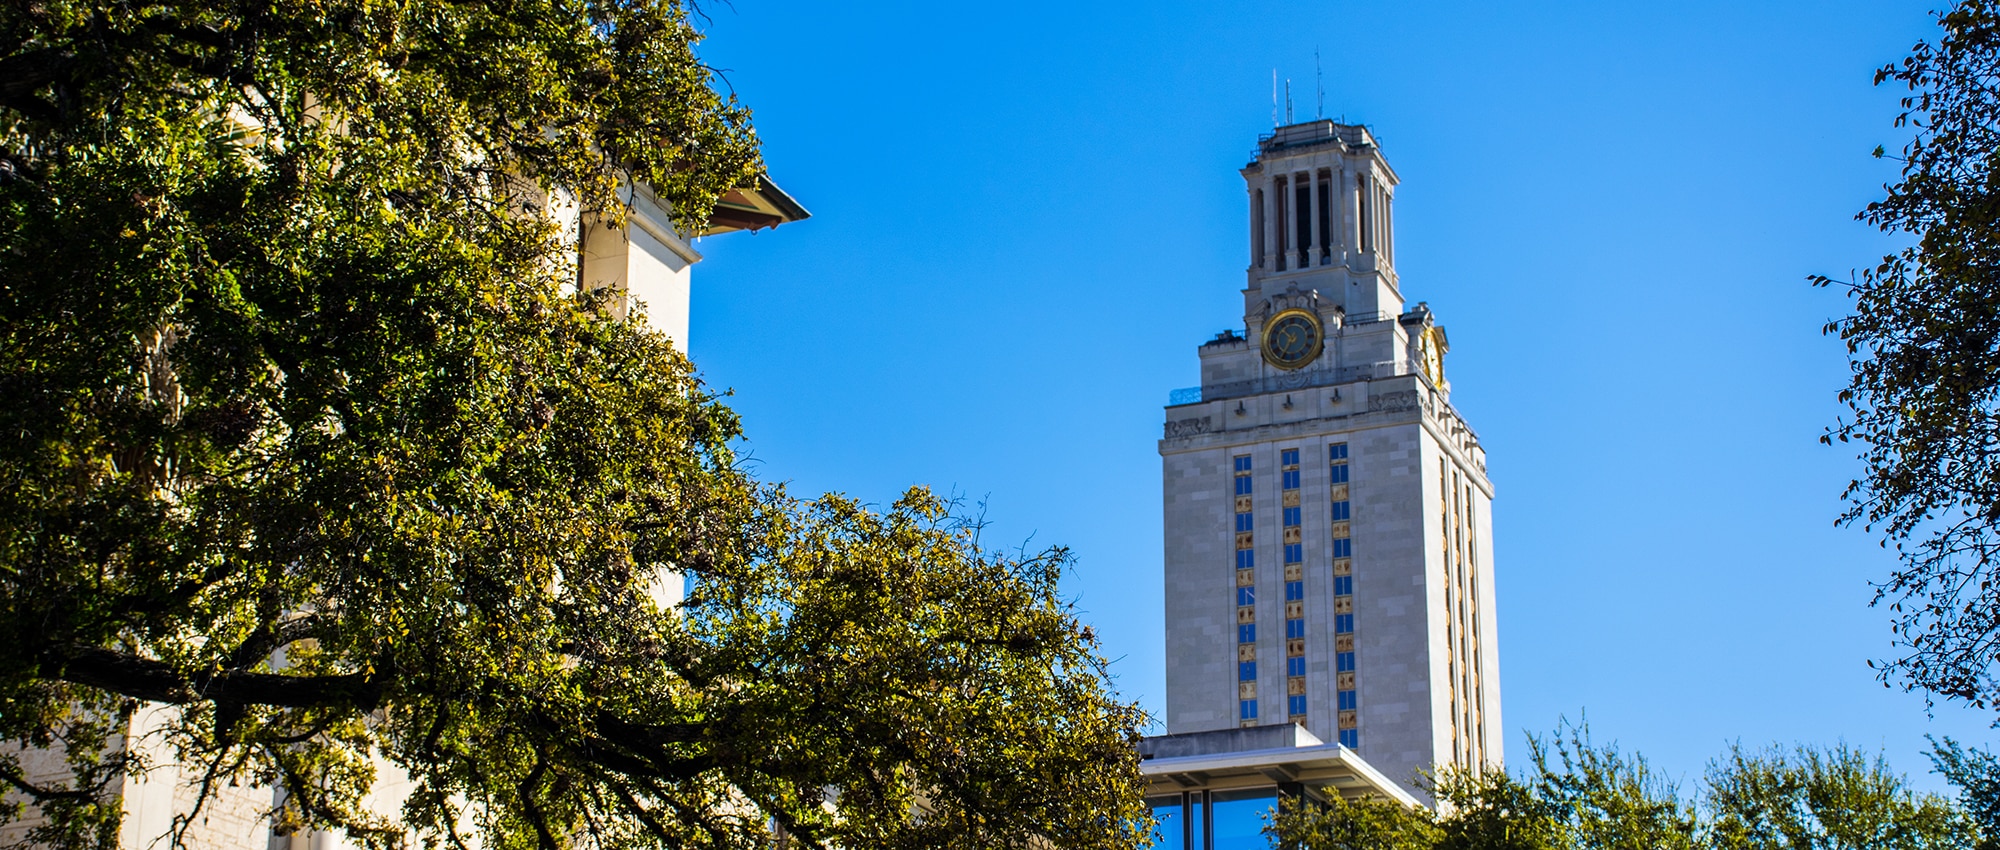 UT Austin, center for innovation, research and education